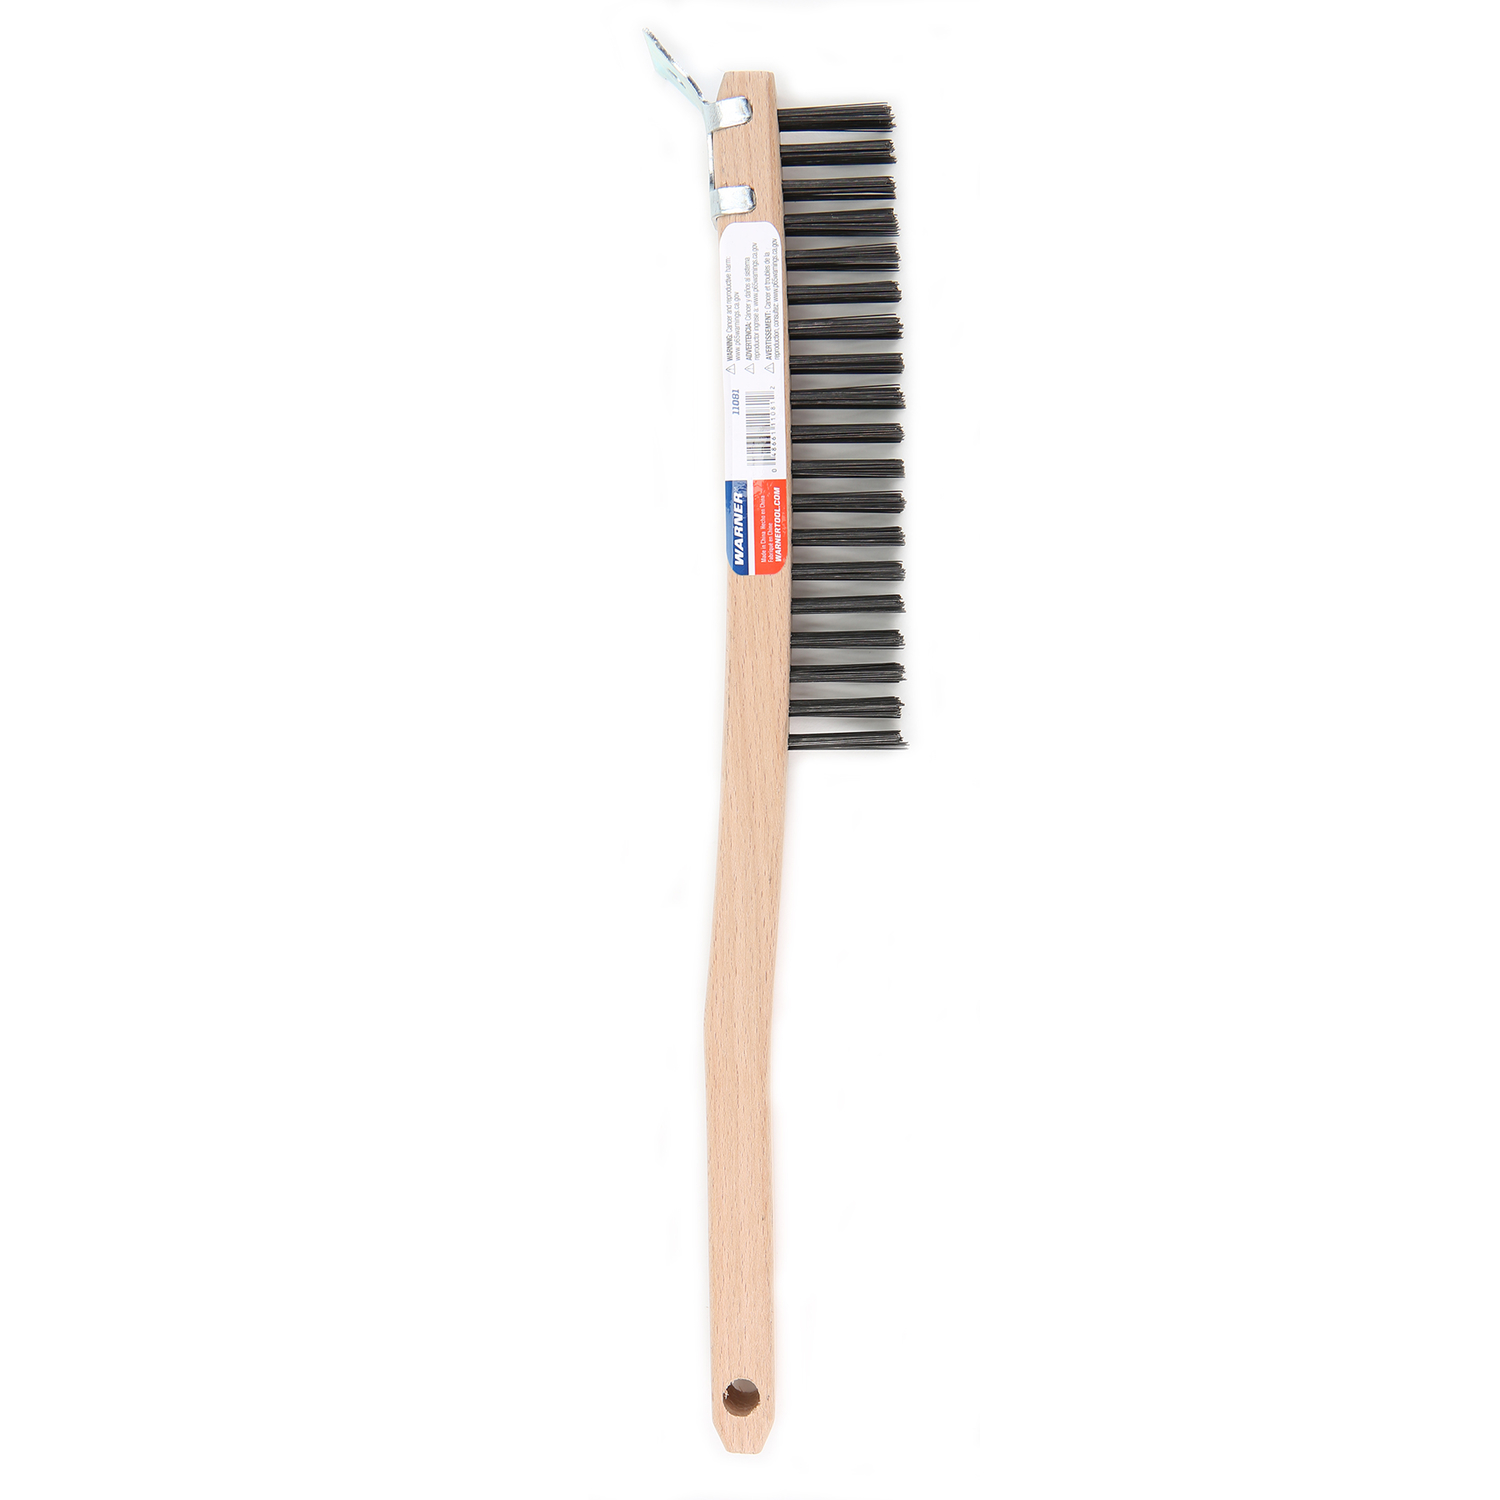 GB) Soft Grip Narrow Nylon Stripper/Grout Brush, Labelled » ALLWAY® The  Tools You Ask For By Name